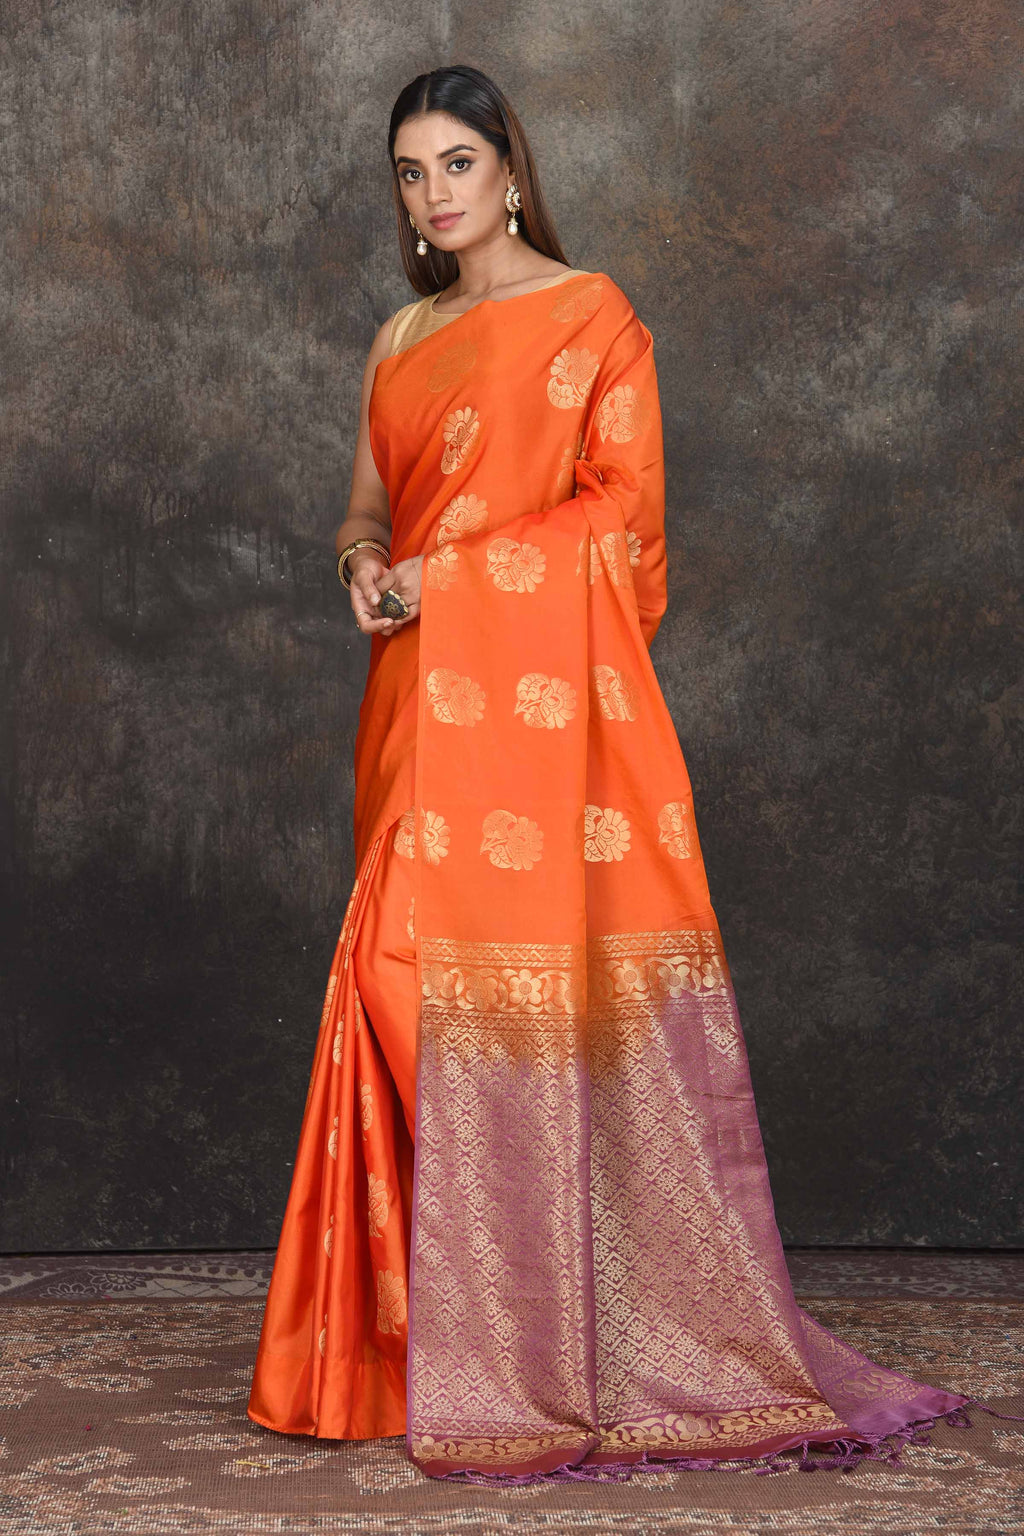 Buy stunning orange Kanjivaram soft silk sari online in USA with purple zari border. Be the center of attraction on special occasions in ethnic sarees, designer sarees, embroidered sarees, handwoven sarees, pure silk sarees from Pure Elegance Indian saree store in USA.-full view